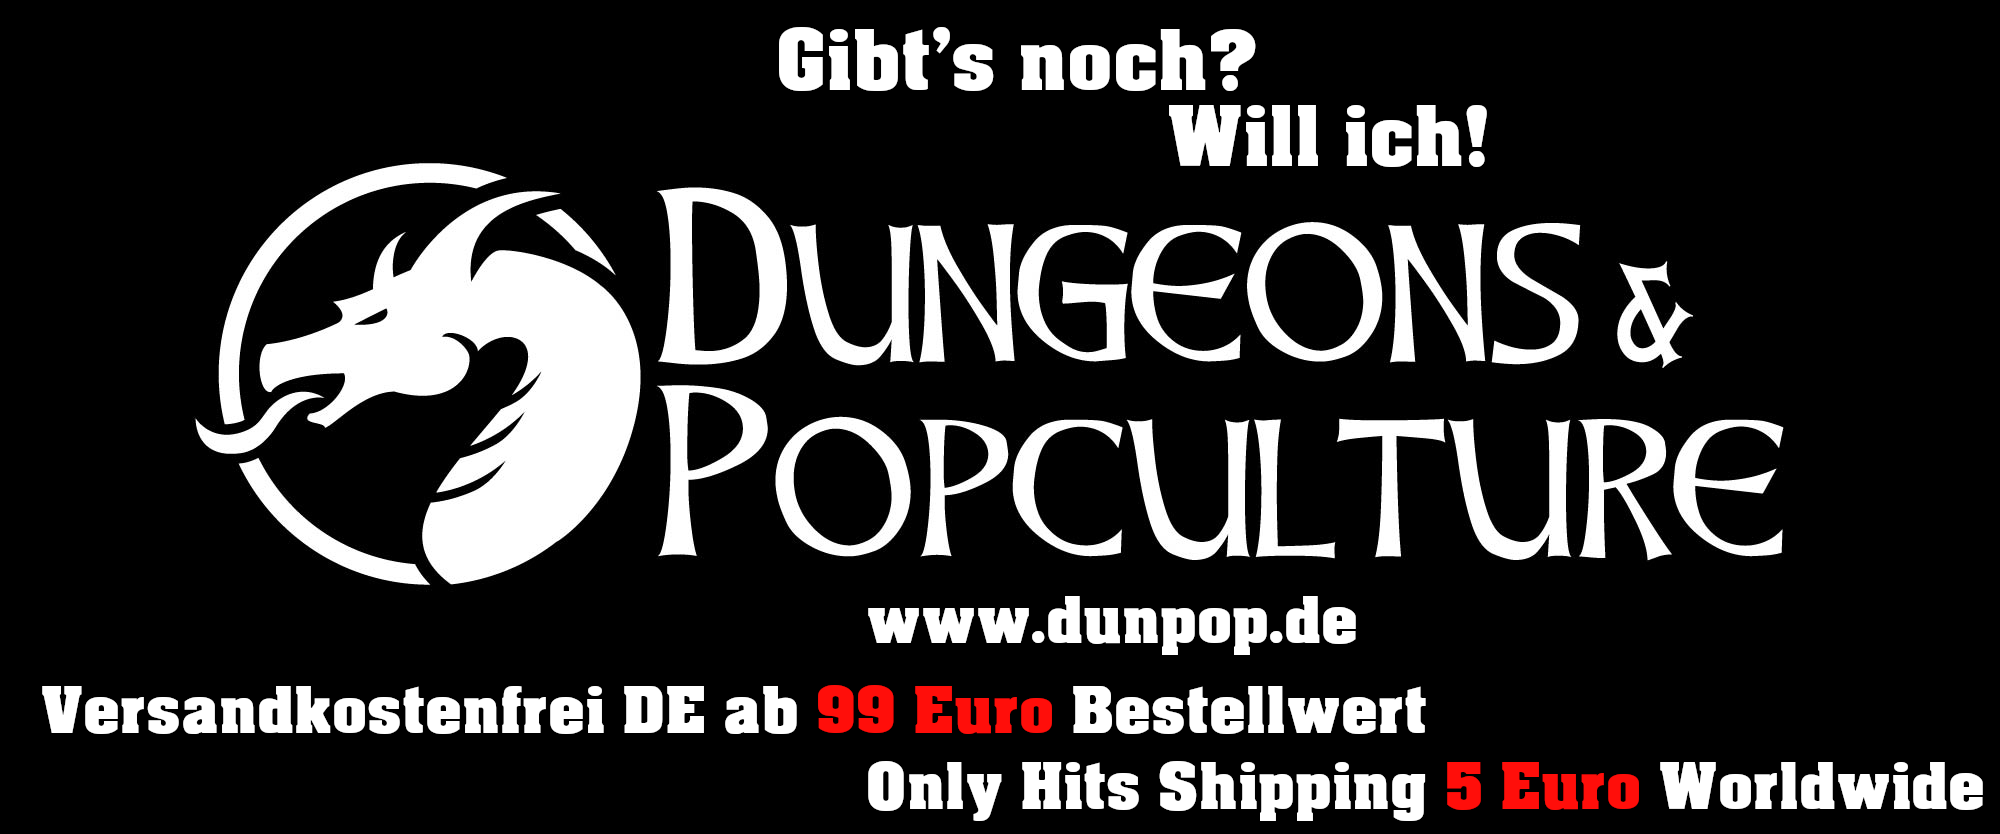 Dungeons & Popculture